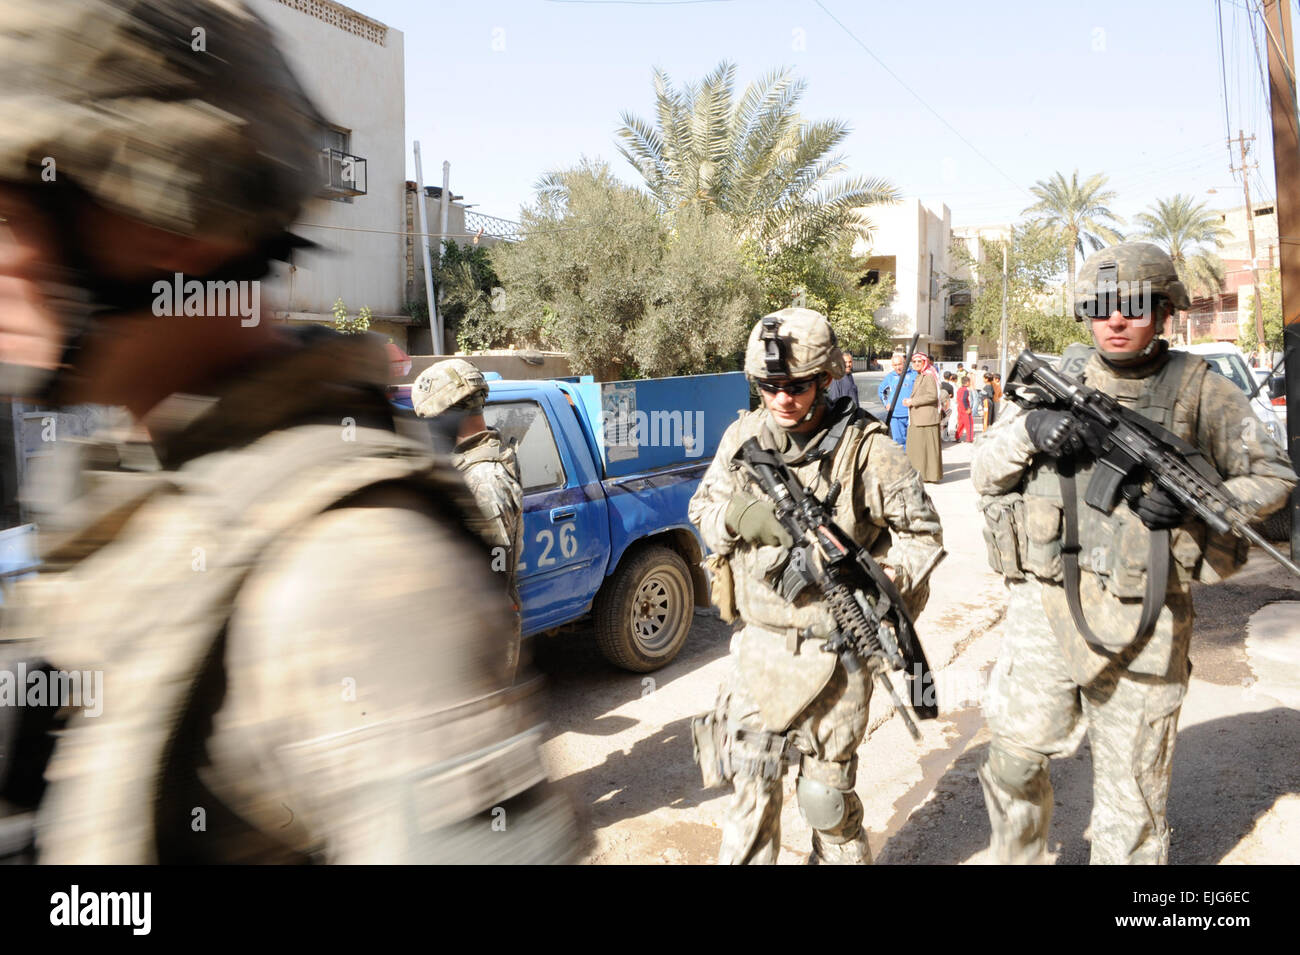 U.S. Soldiers of Alpha Battery, 3rd Battalion, 29th Field Artillery Regiment, 3rd Brigade, 4th Infantry Division, search homes for illegal weapons in the city of Baghdad, Iraq on Feb. 1, 2009. They are trying to find the unlawful weapons to try to make the city a safer place to live. Stock Photo